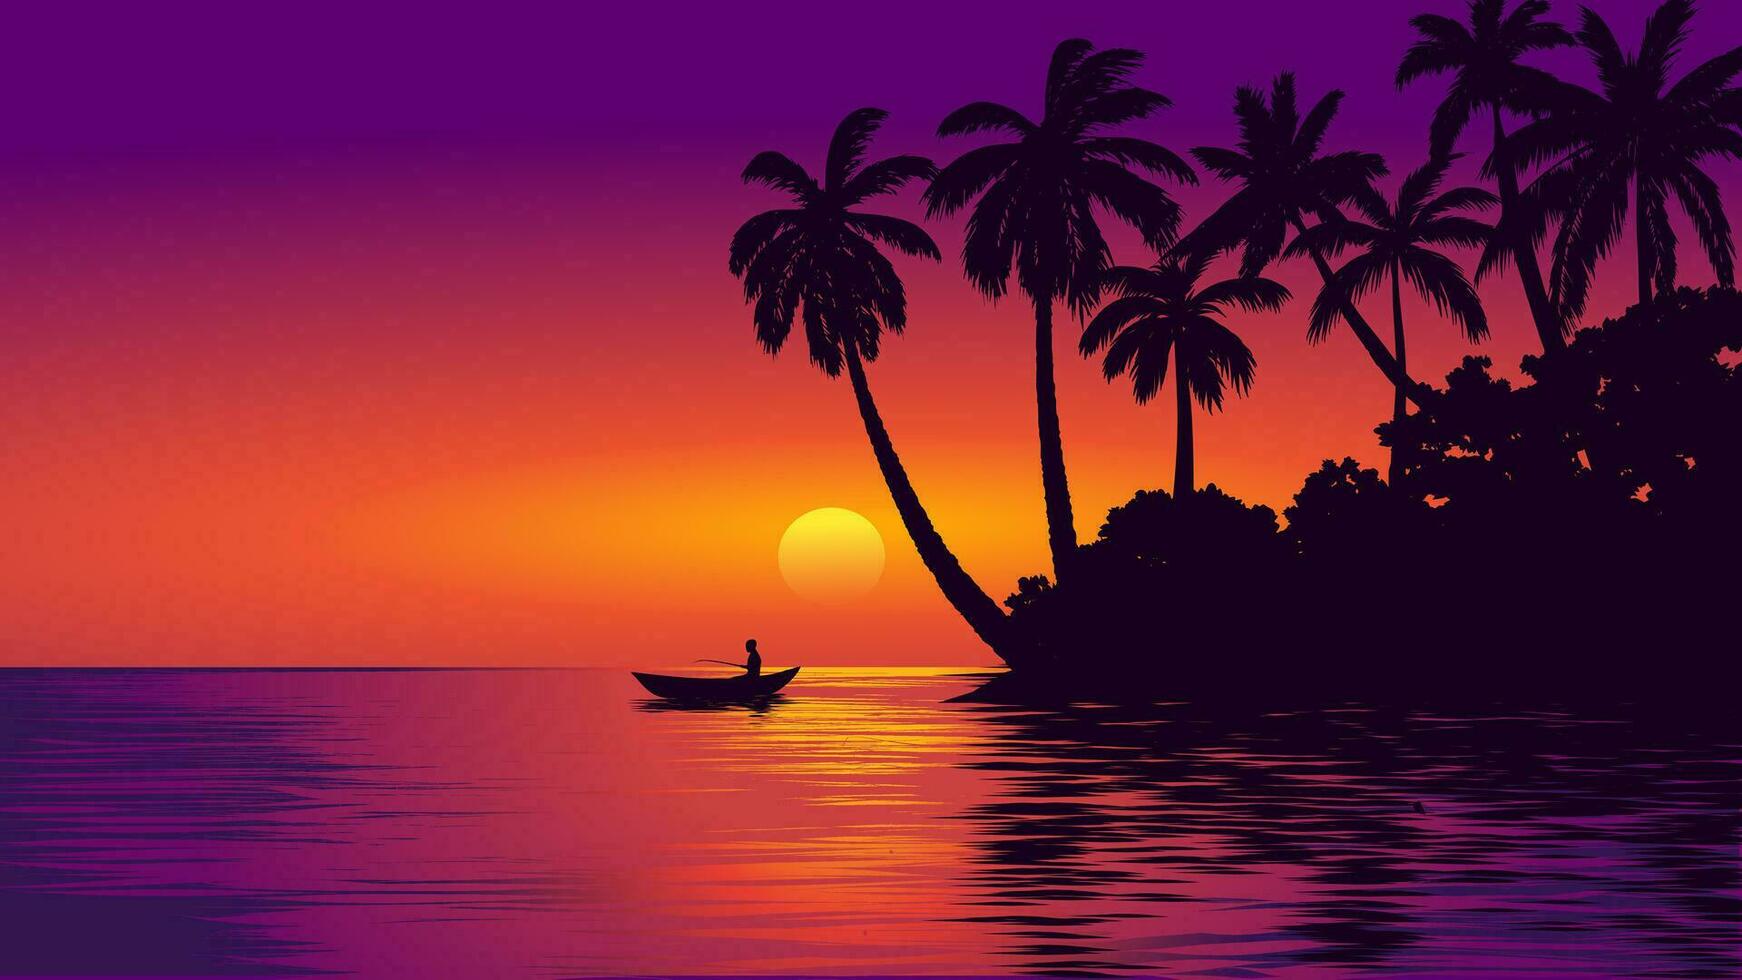 Dramatic sunset landscape at beach with coconut trees vector